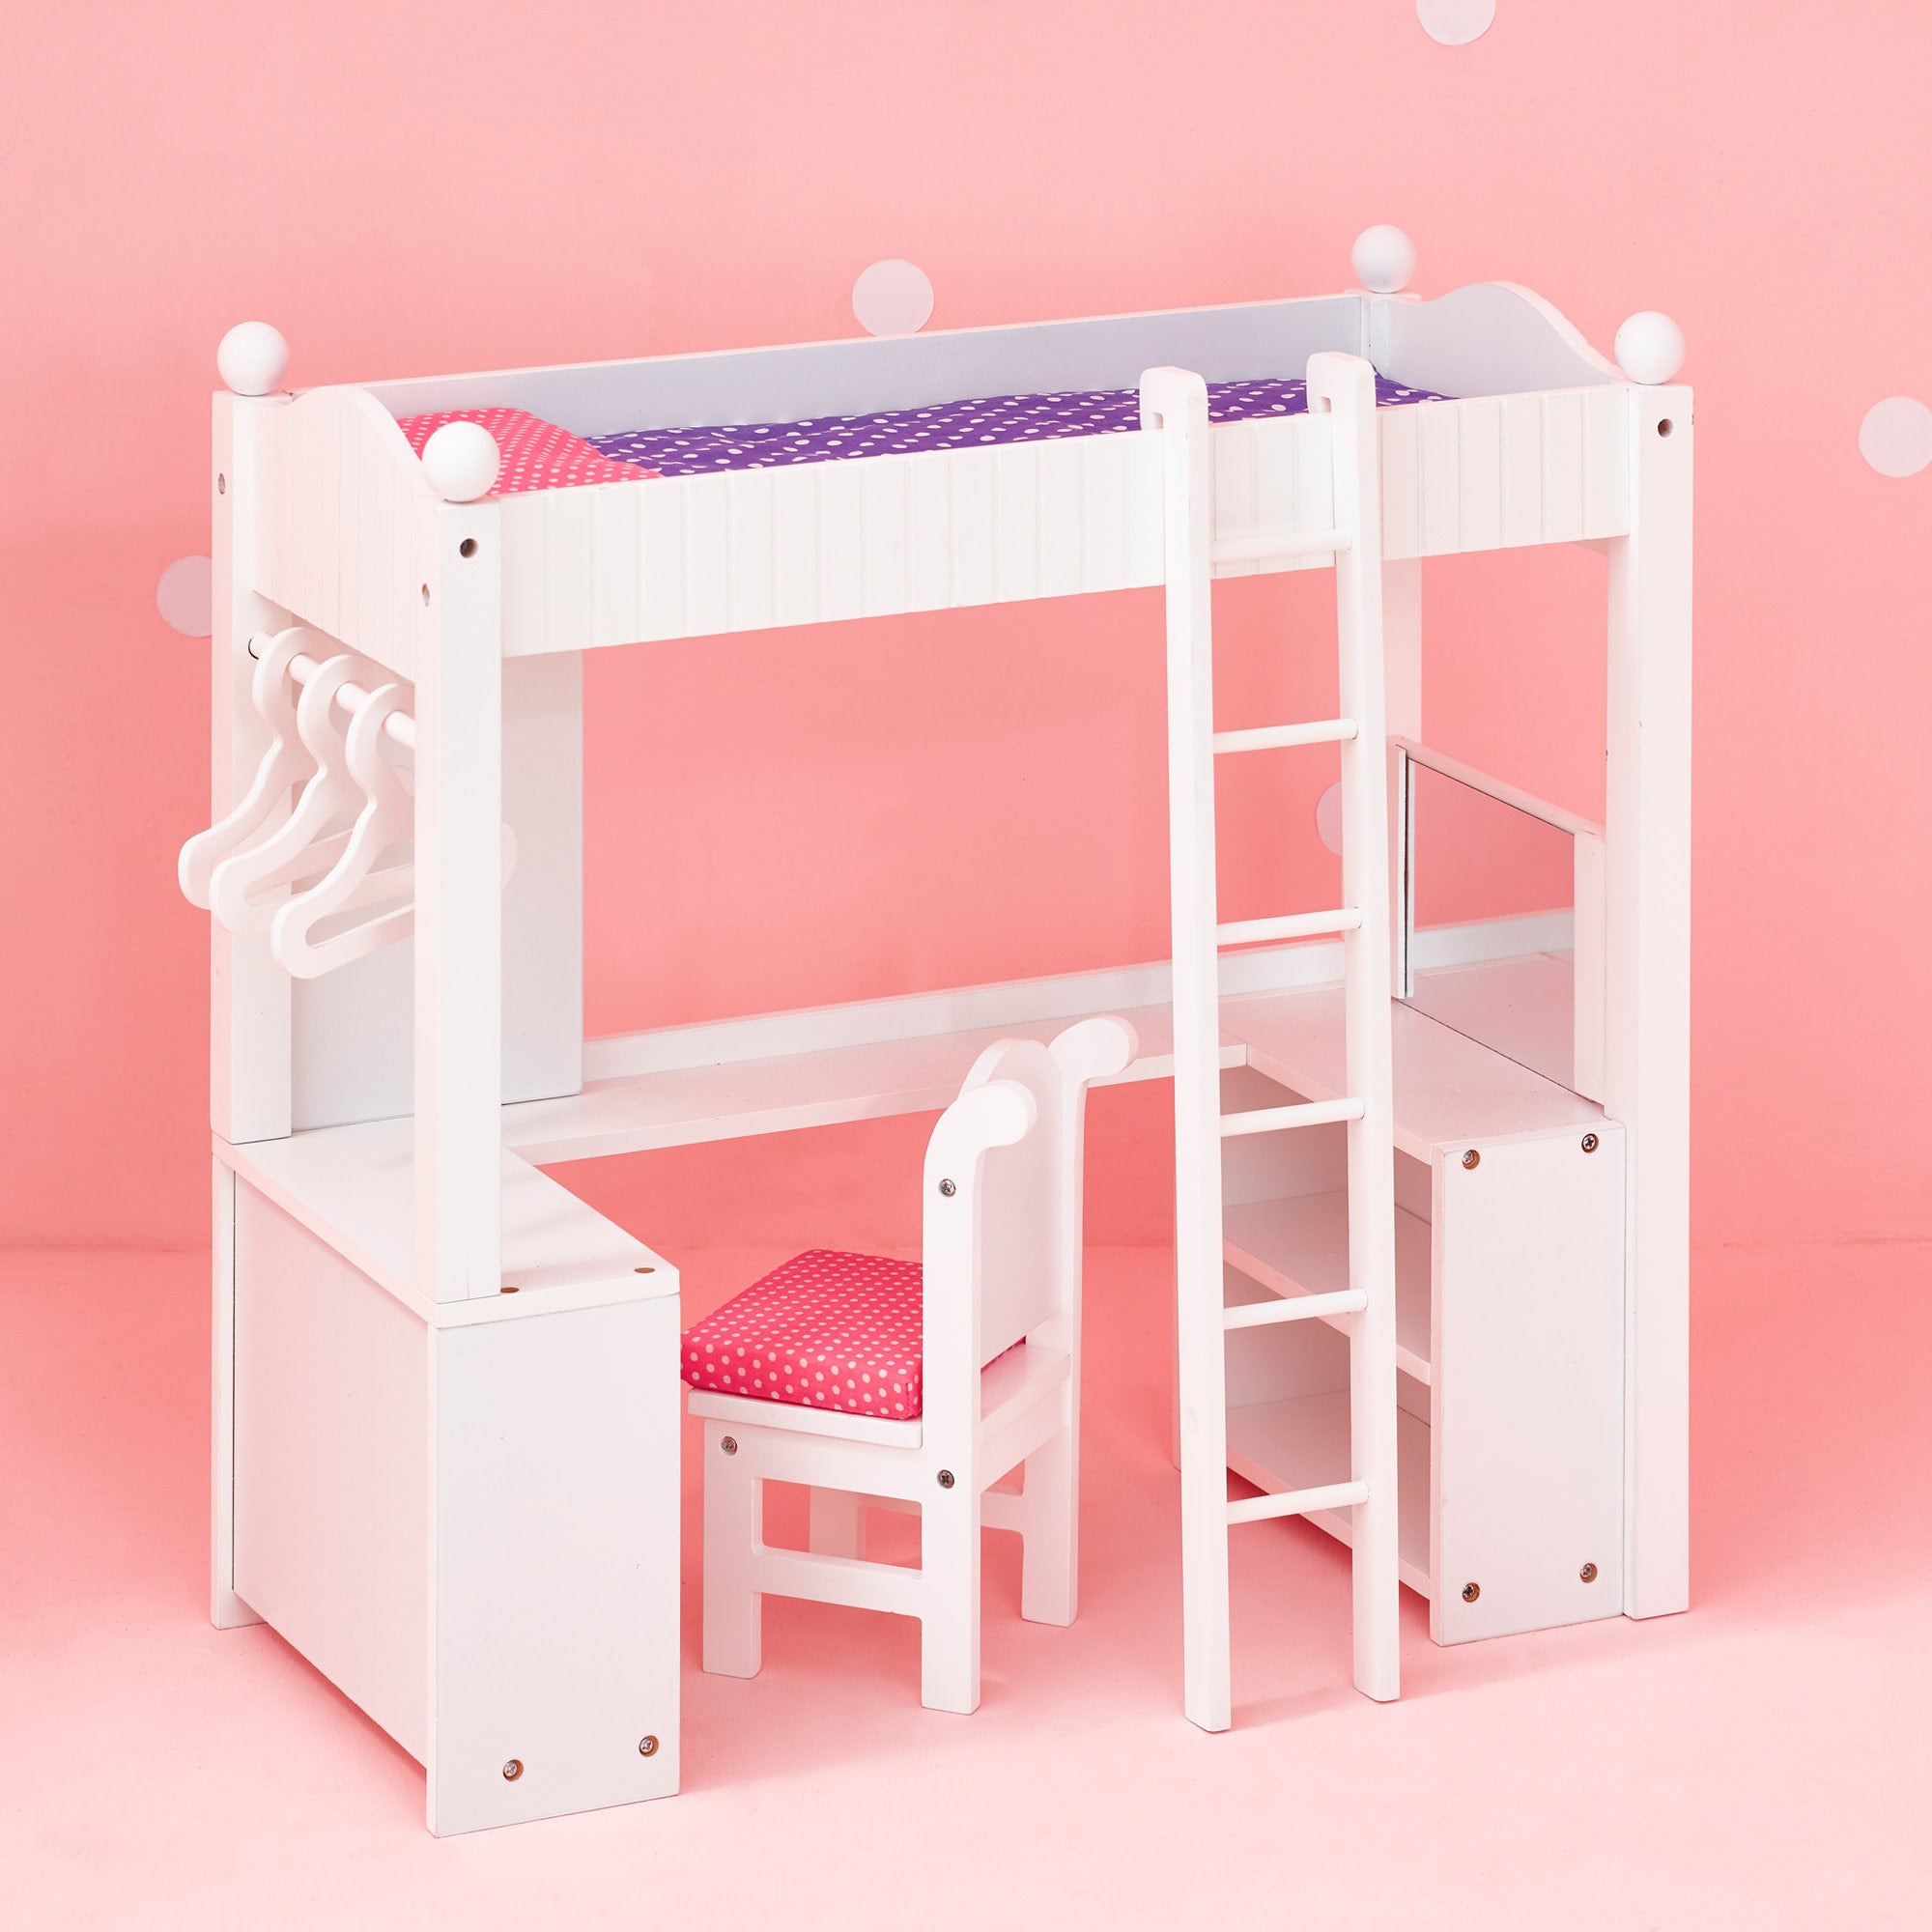 Olivia's Little World Little Princess Bunk Bed Desk with Storage for 18" Dolls, Gray/Pink